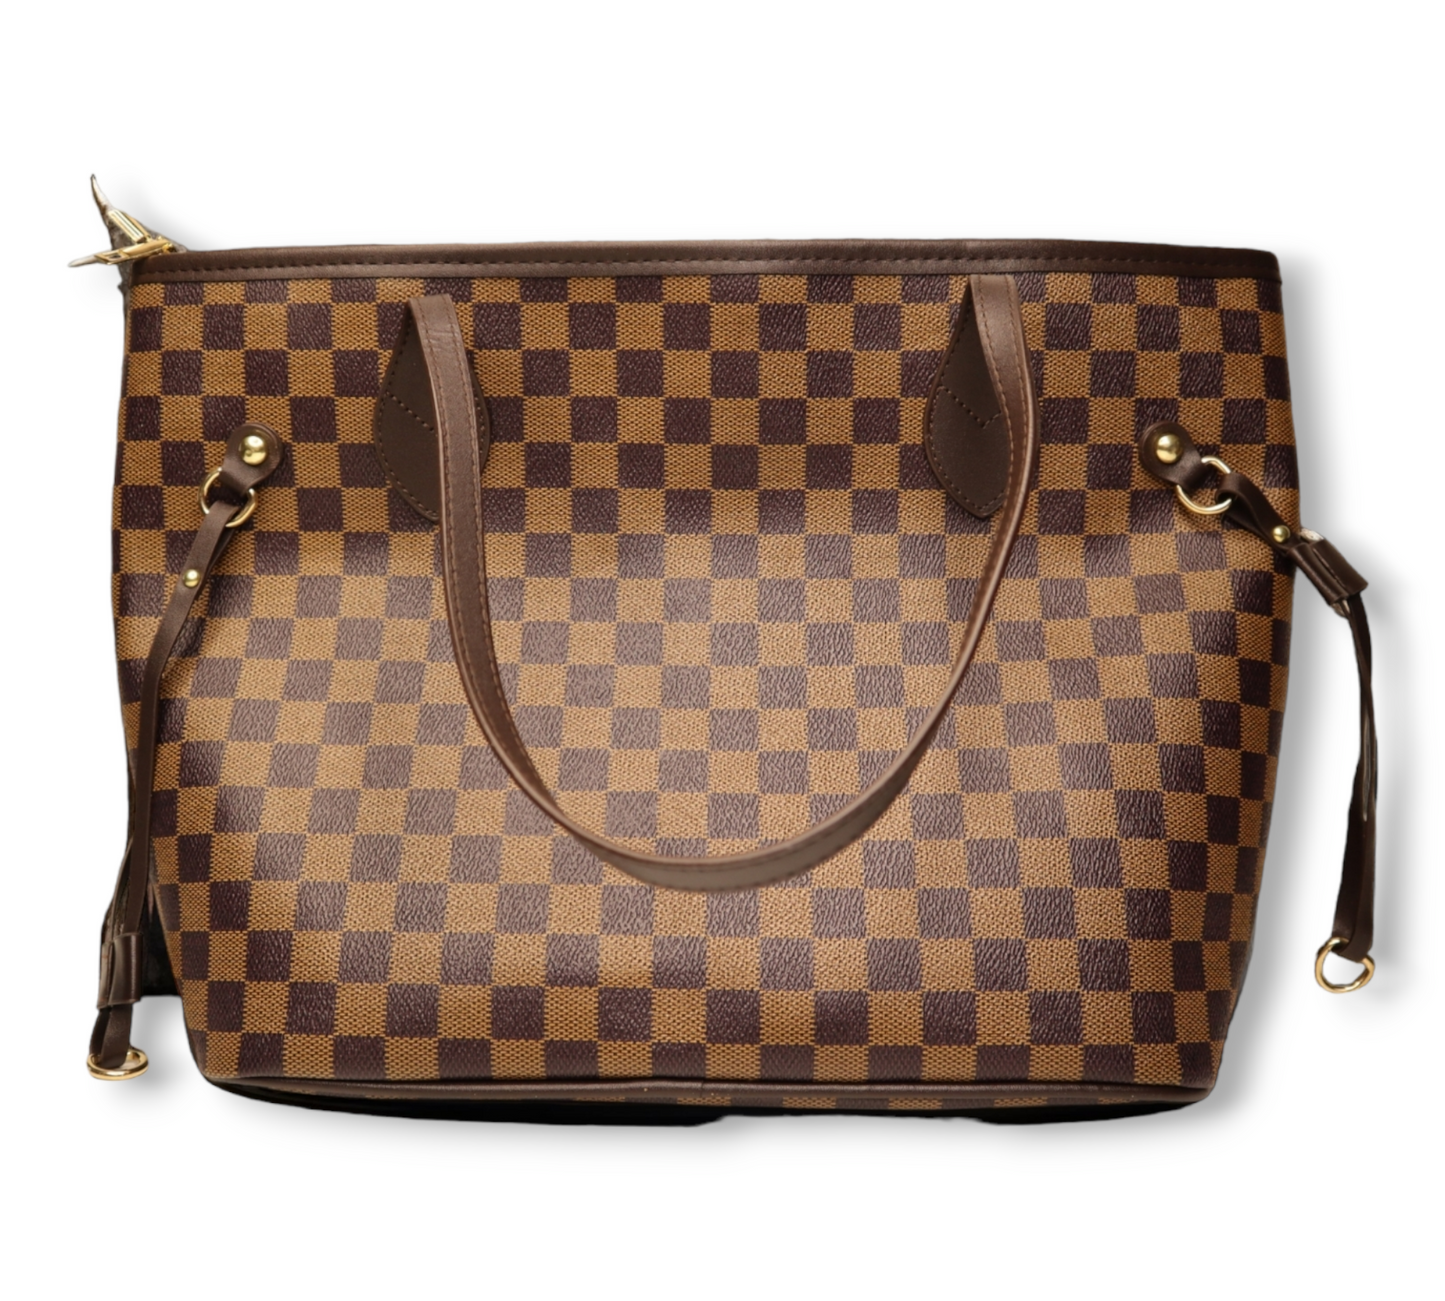 Checkerboard Style, Casual Tote Bag, Two Piece Zipper Bag